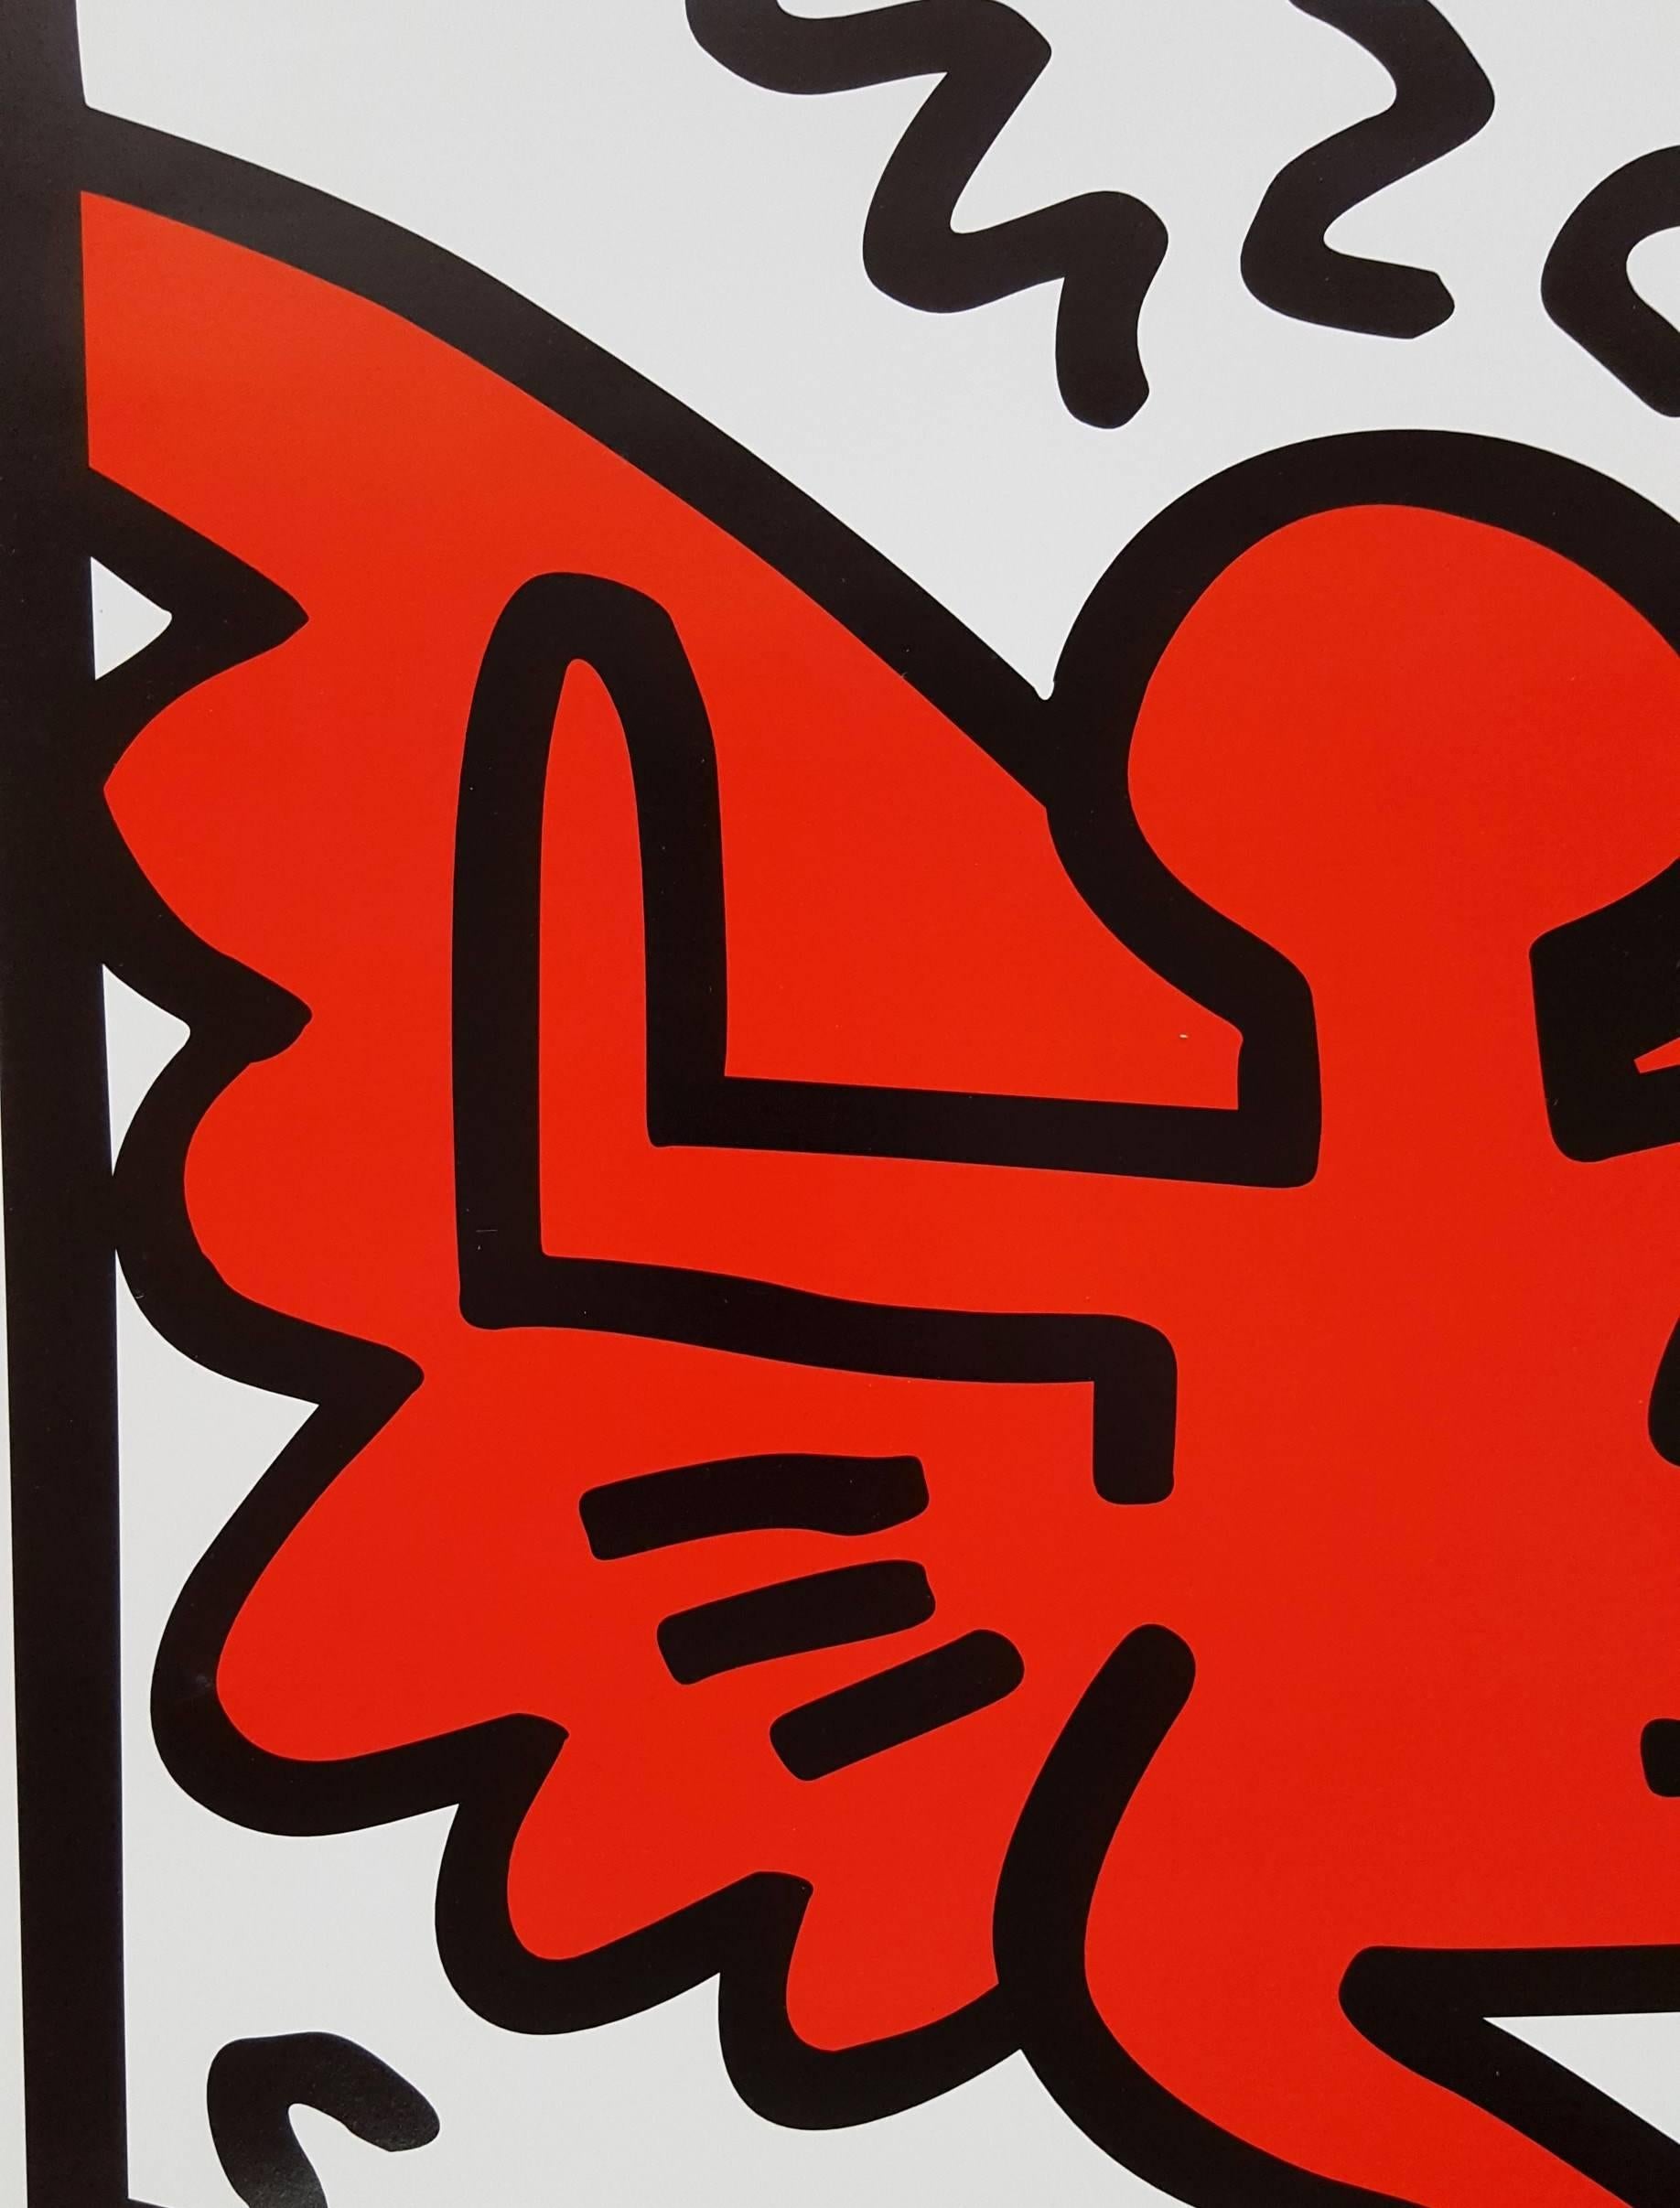 The Keith Haring Altarpiece: An AIDS Memorial Chapel Project - Gray Figurative Print by (after) Keith Haring